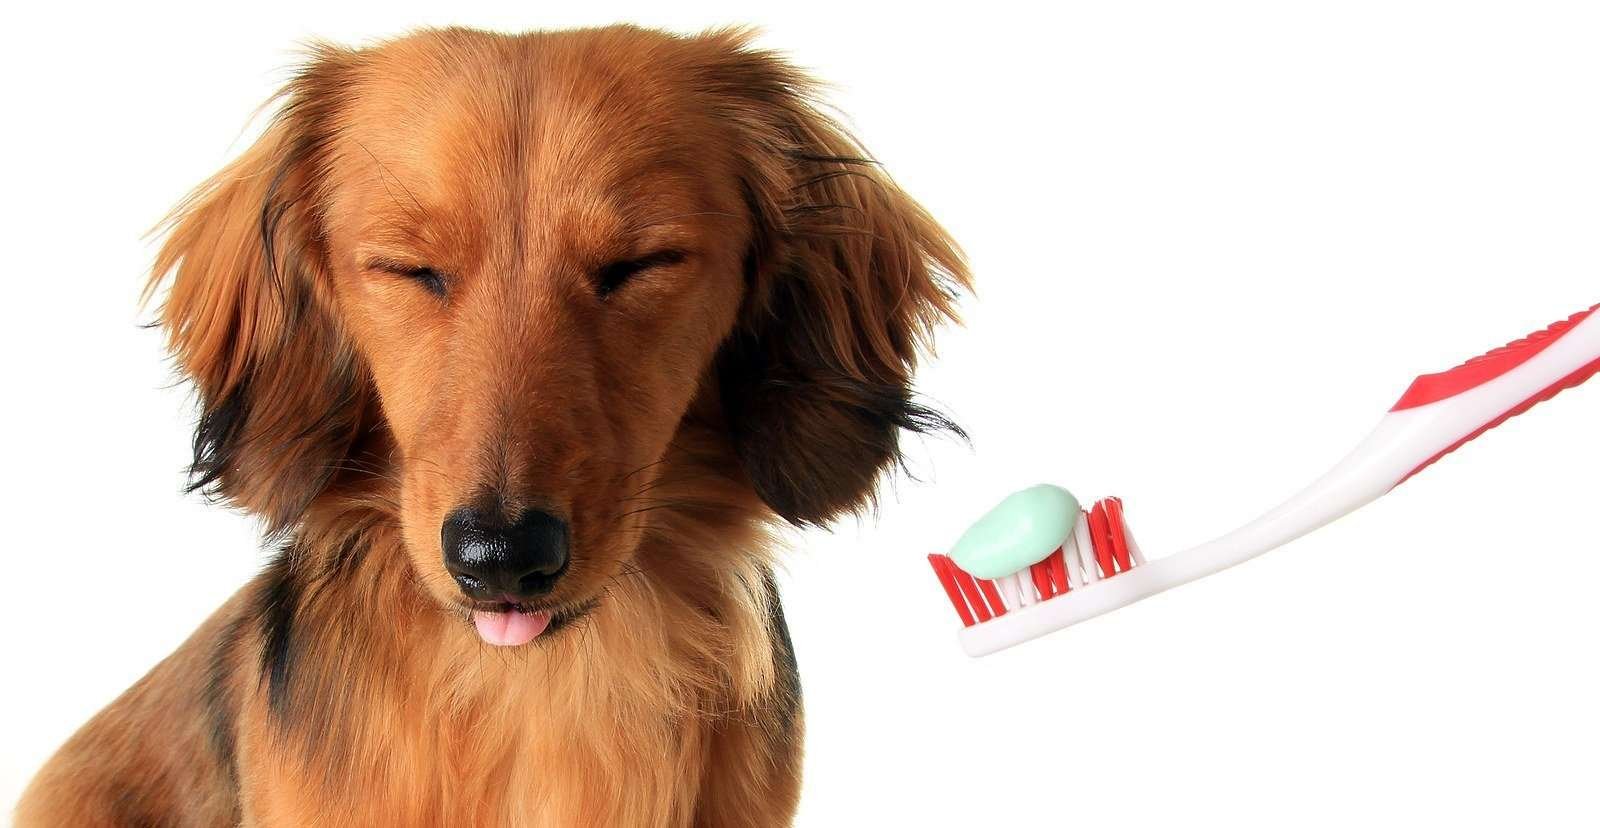 How to cure a dog's bad breath